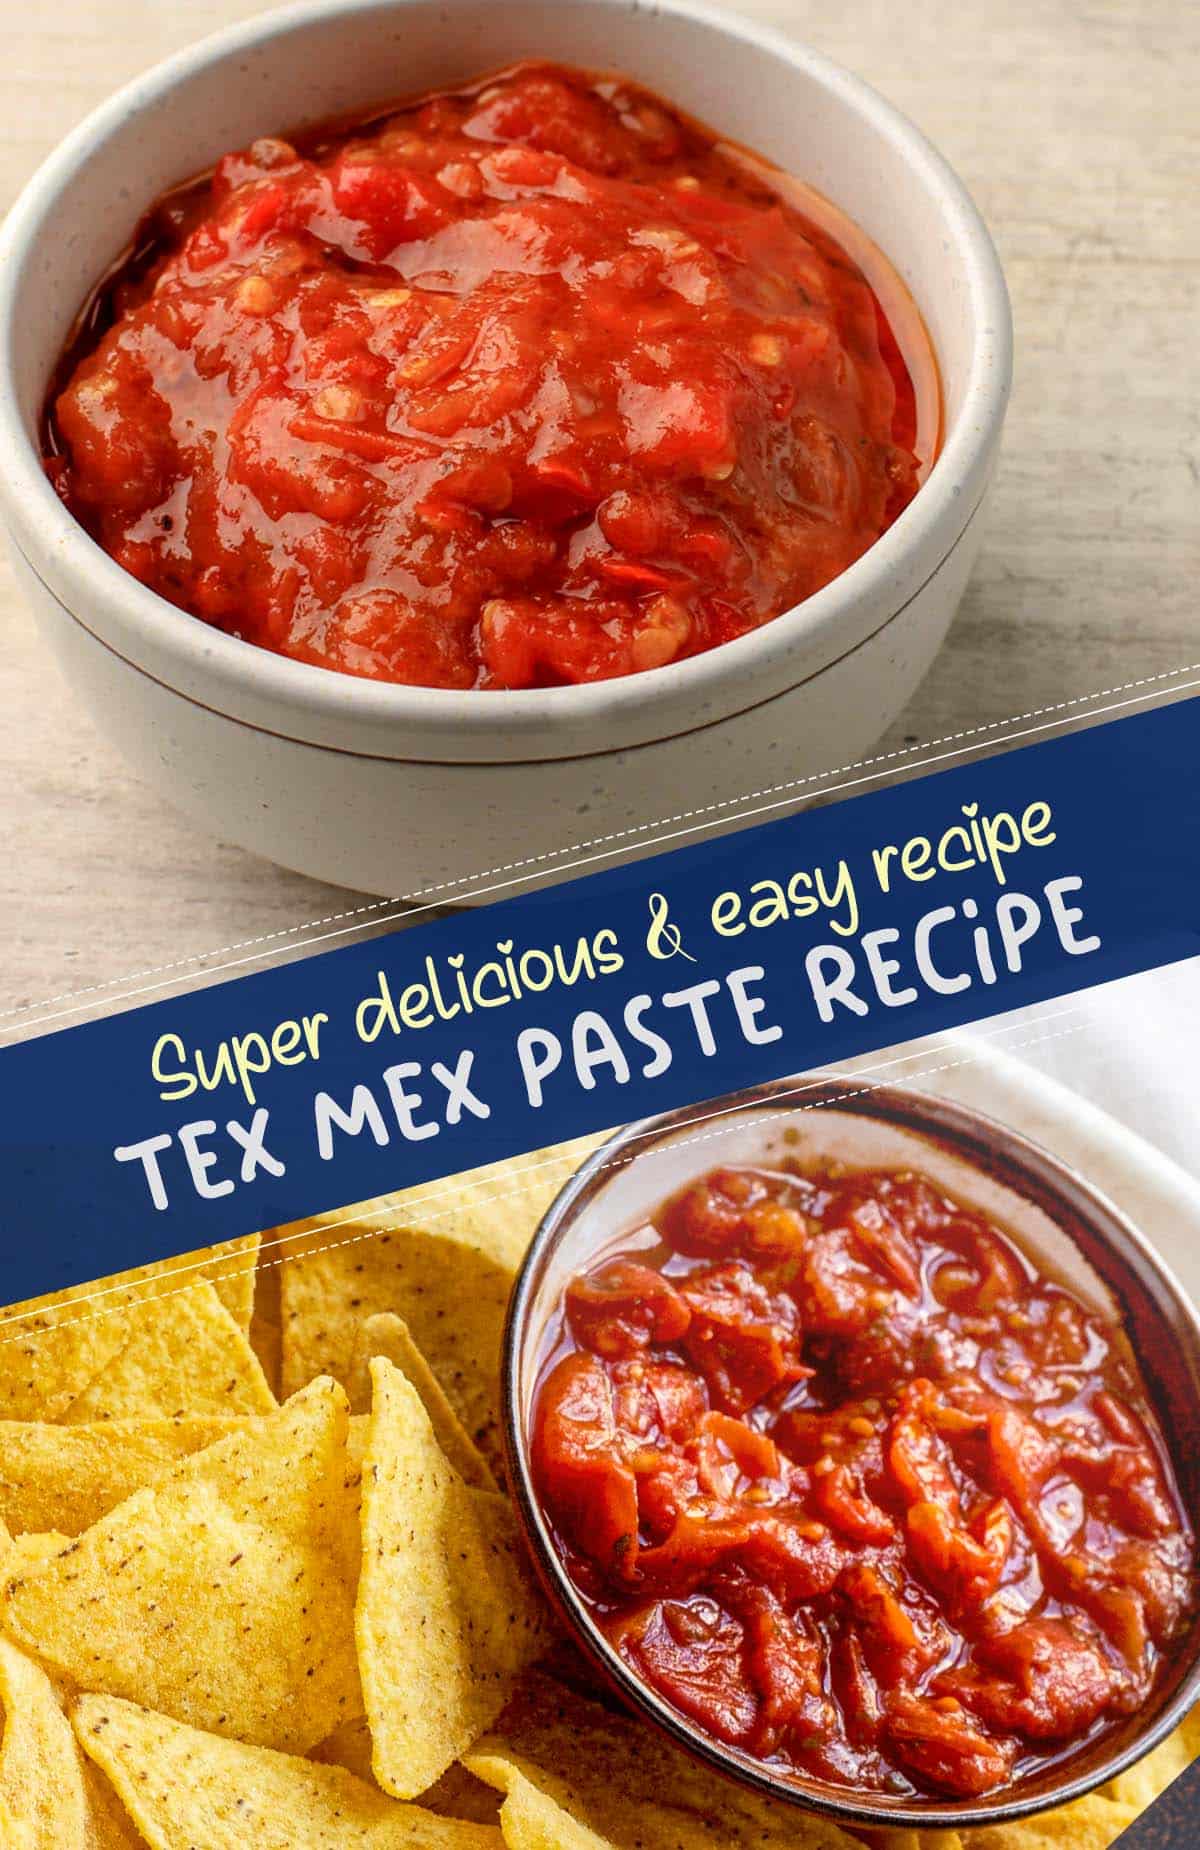 You can create this easy Tex-Mex paste for a flavor boost in tacos, fajitas, and Southwestern dishes, and prepare for memorable Taco Tuesdays.